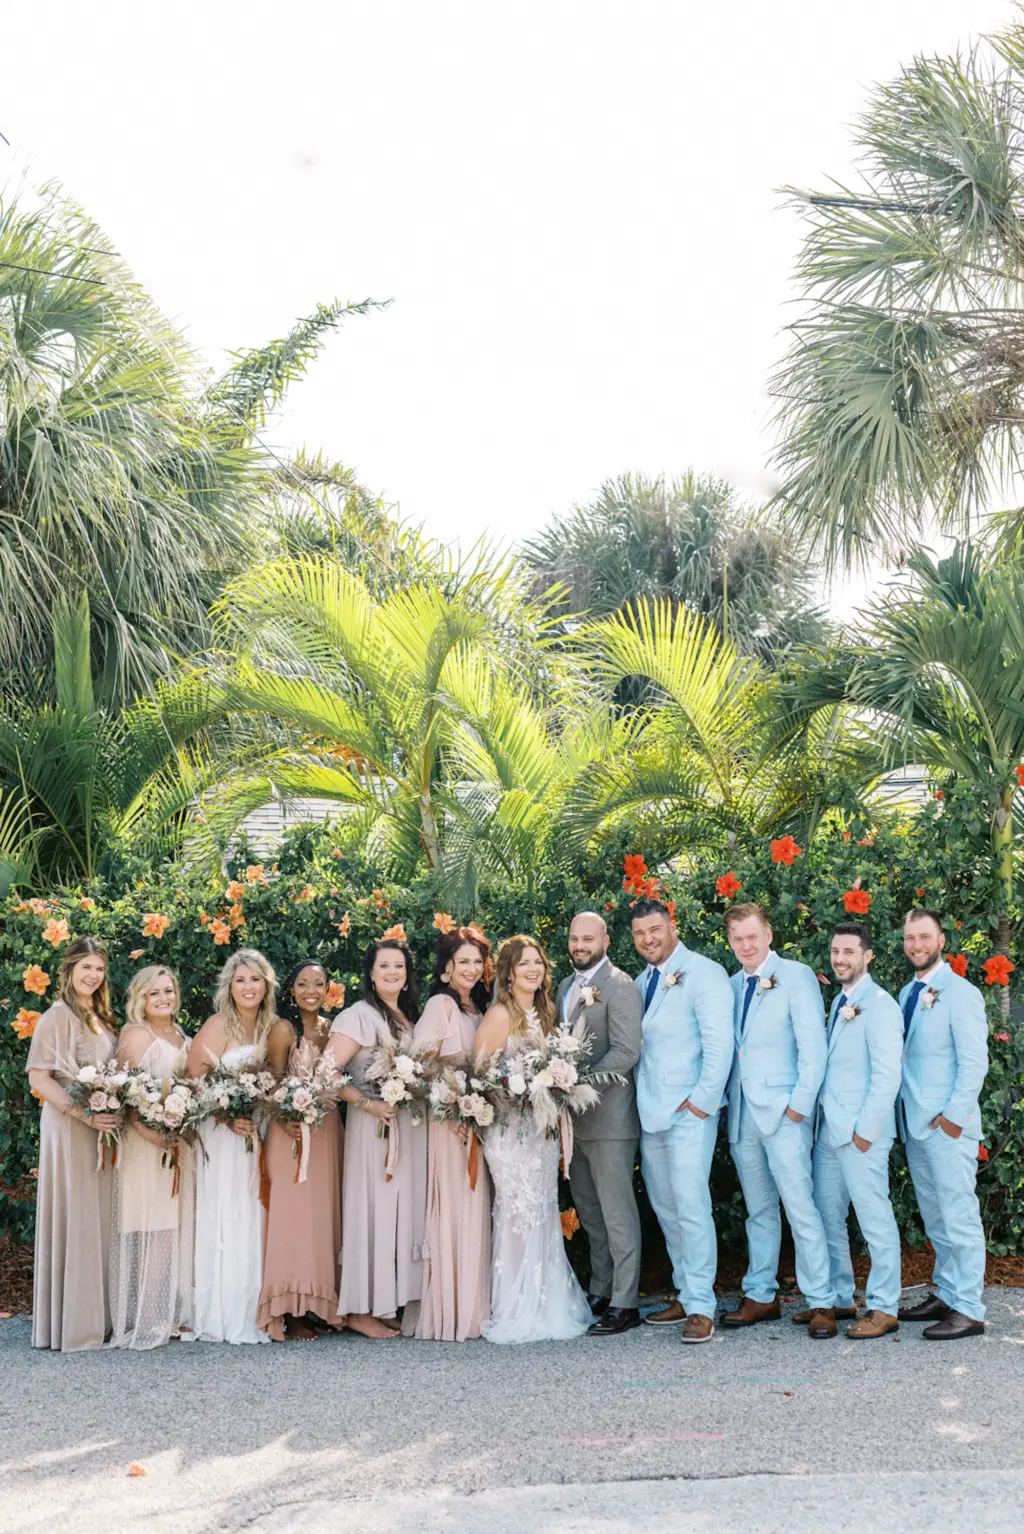 Bridesmaids in Floor Length Pale Blush Dusty Pink Bridesmaids Dresses and Groomsmen in Powder Blue Suits Bridal Party Portrait